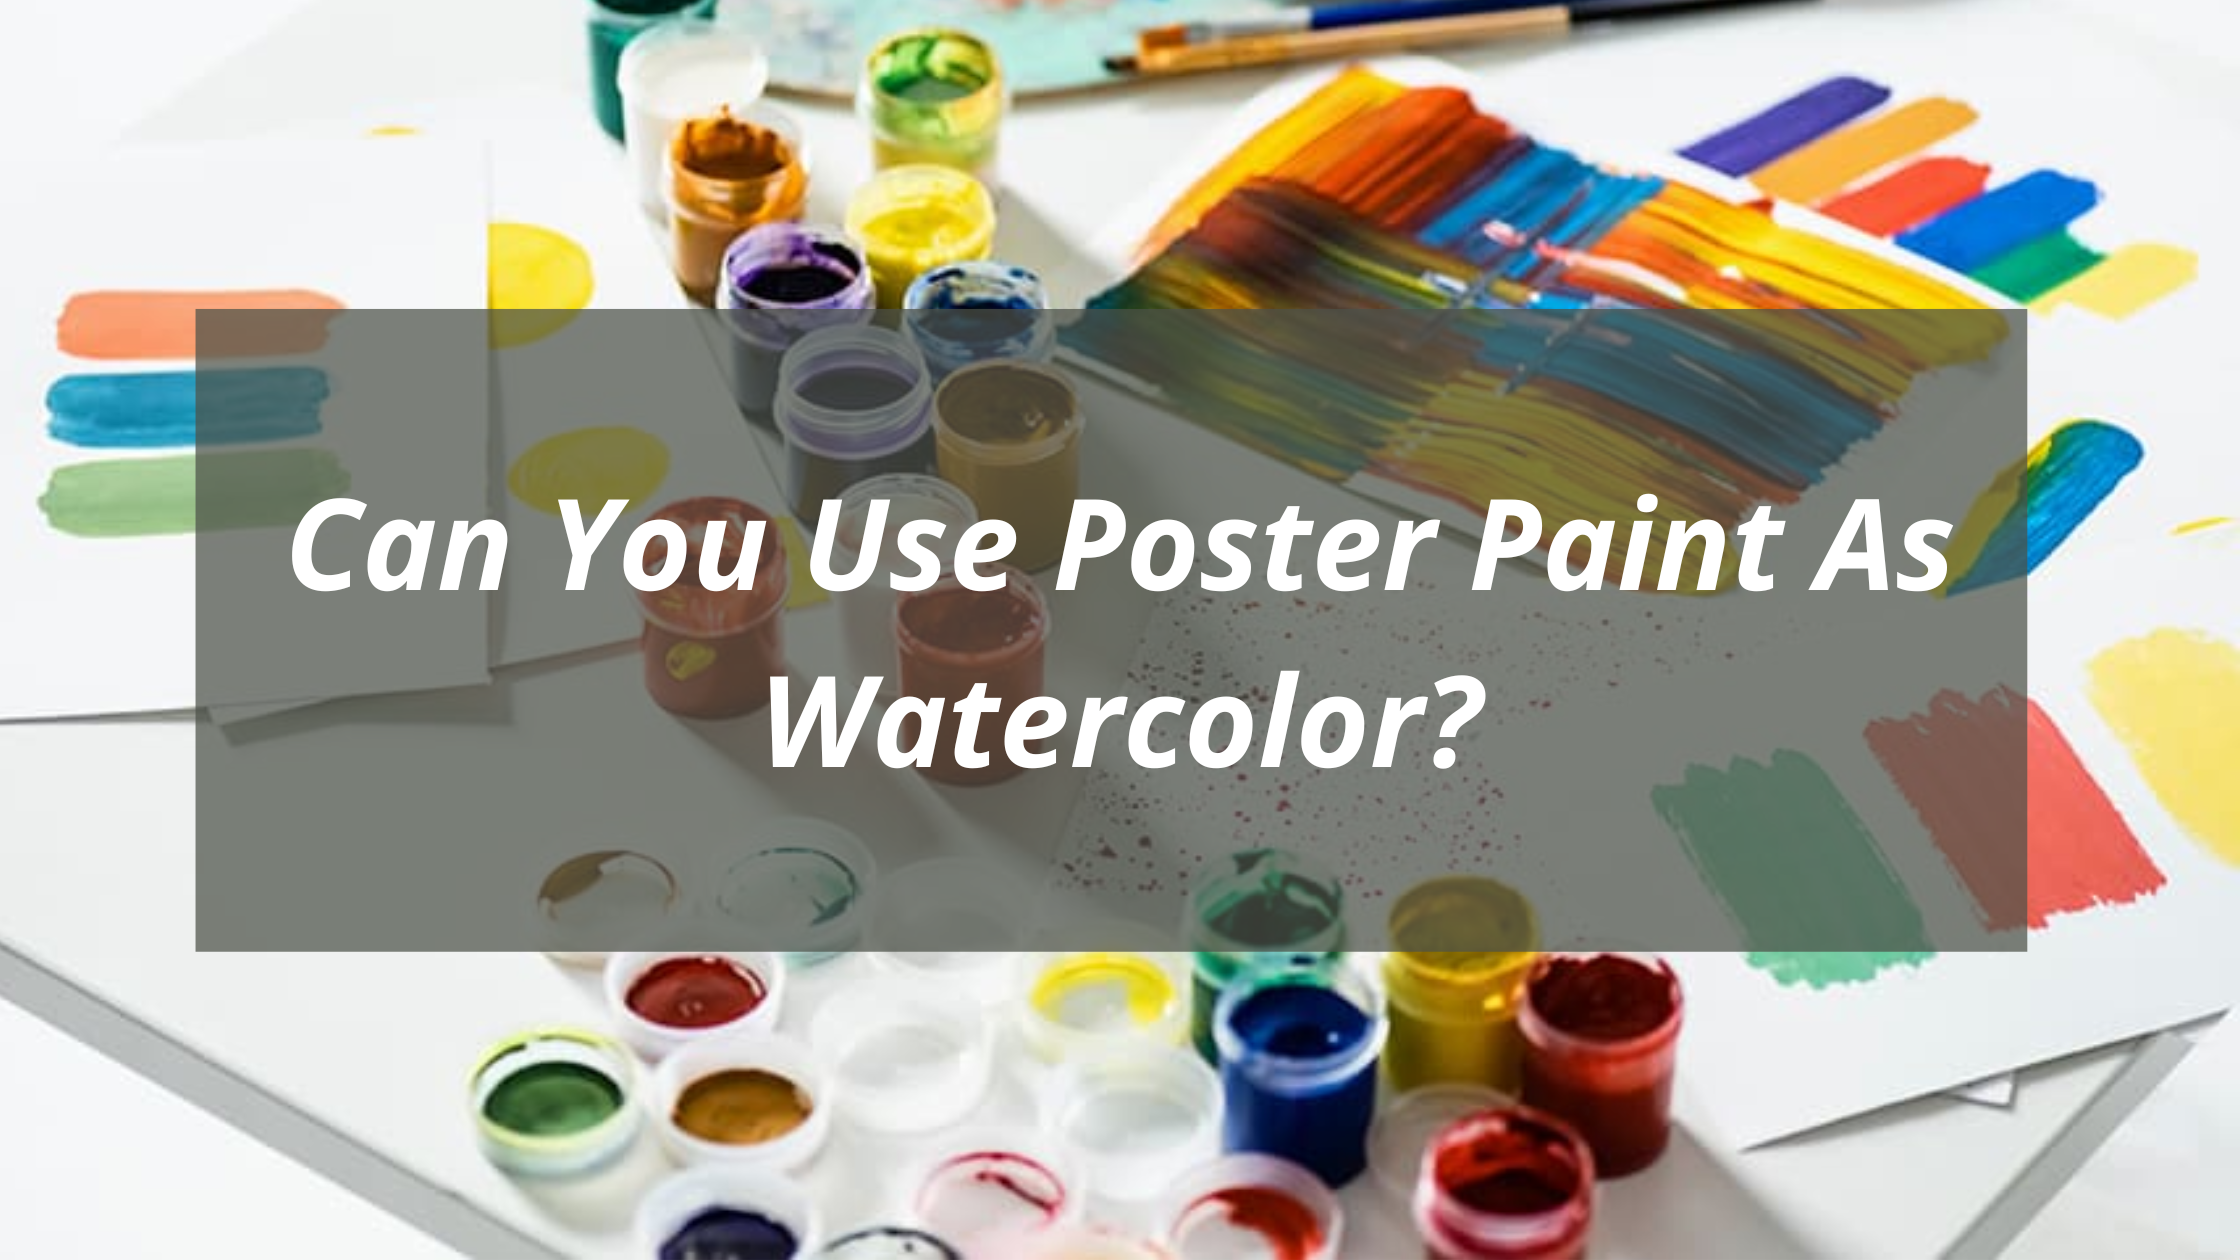 Can You Use Poster Paint As Watercolor?